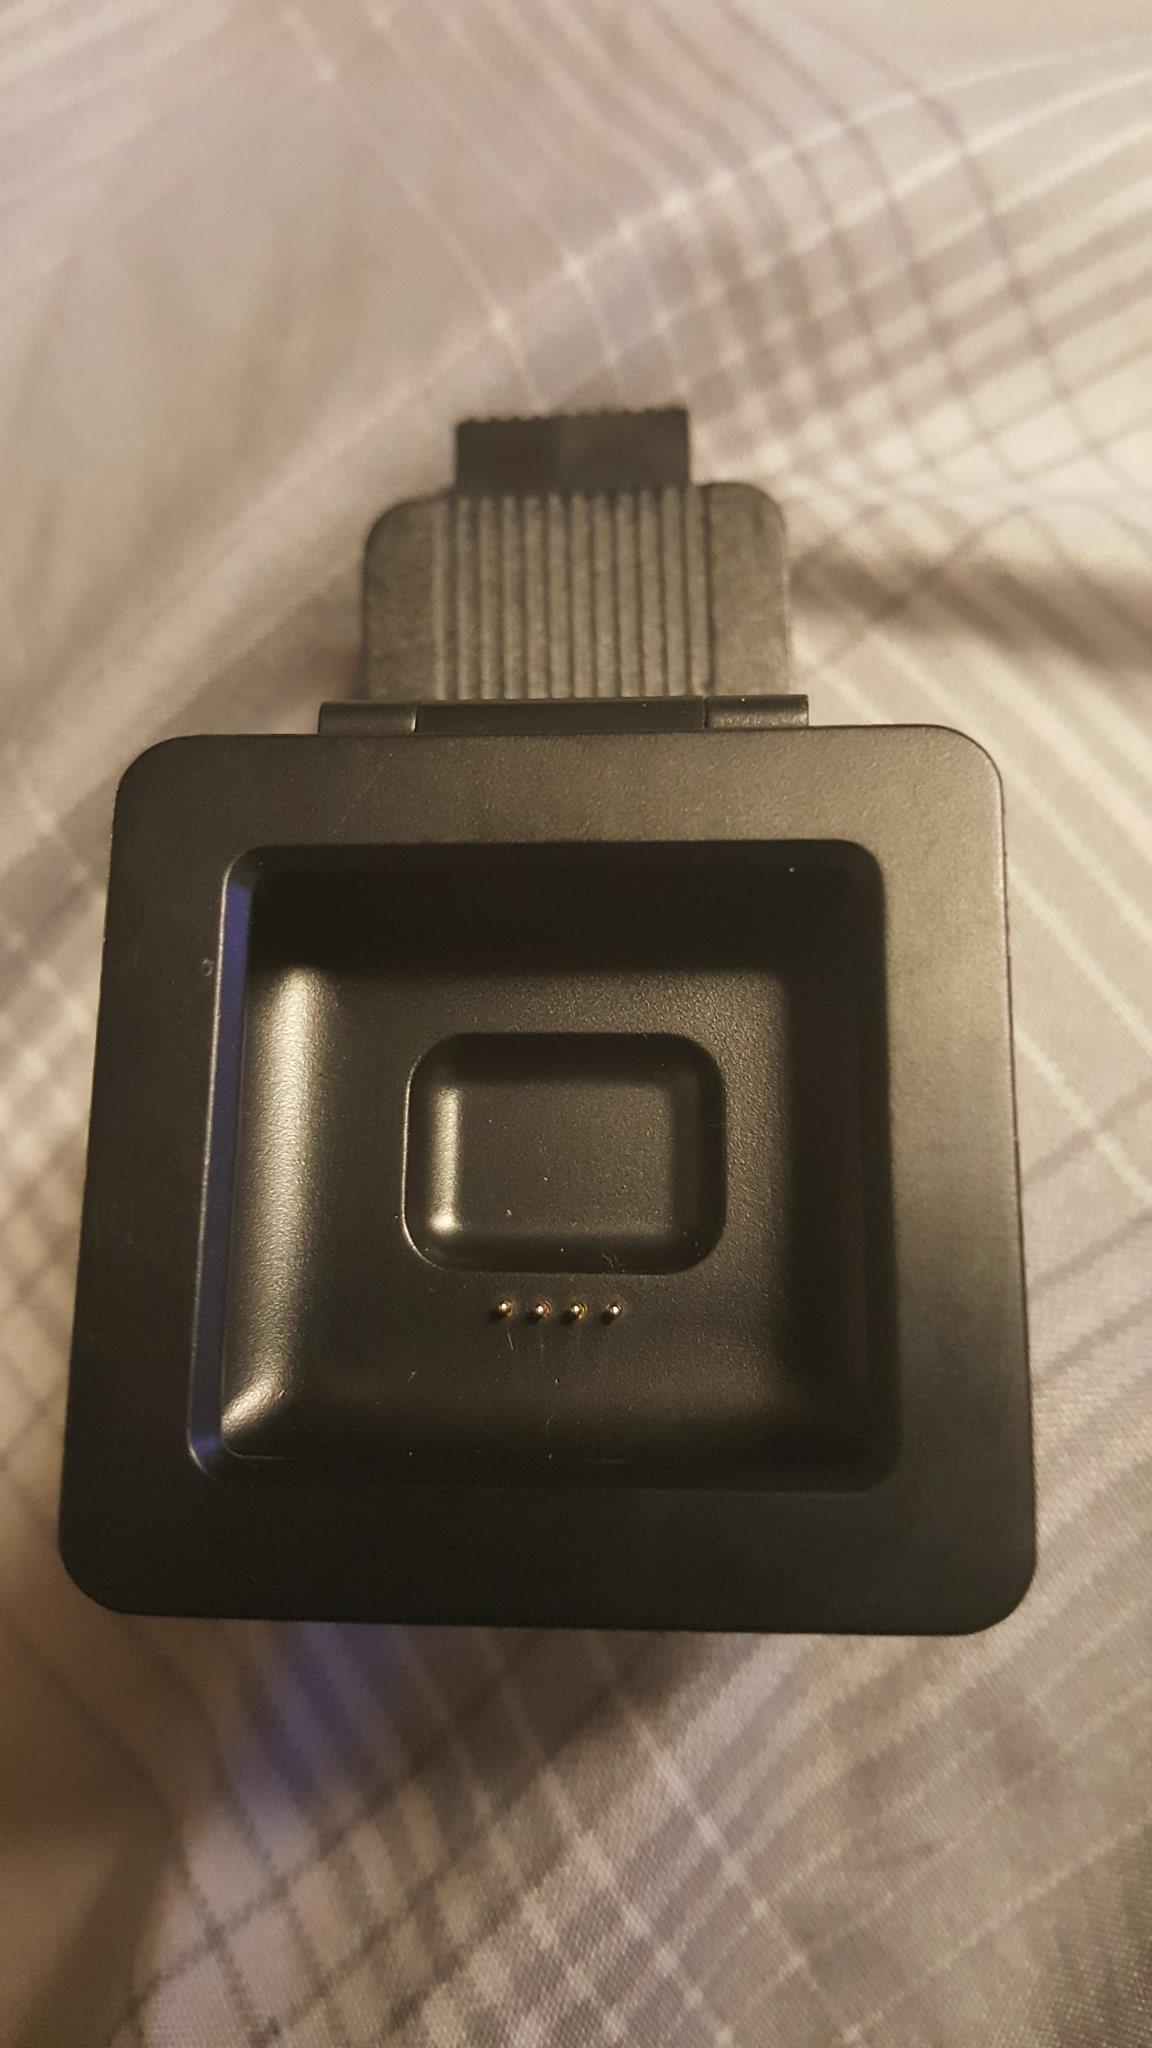 fitbit fob watch